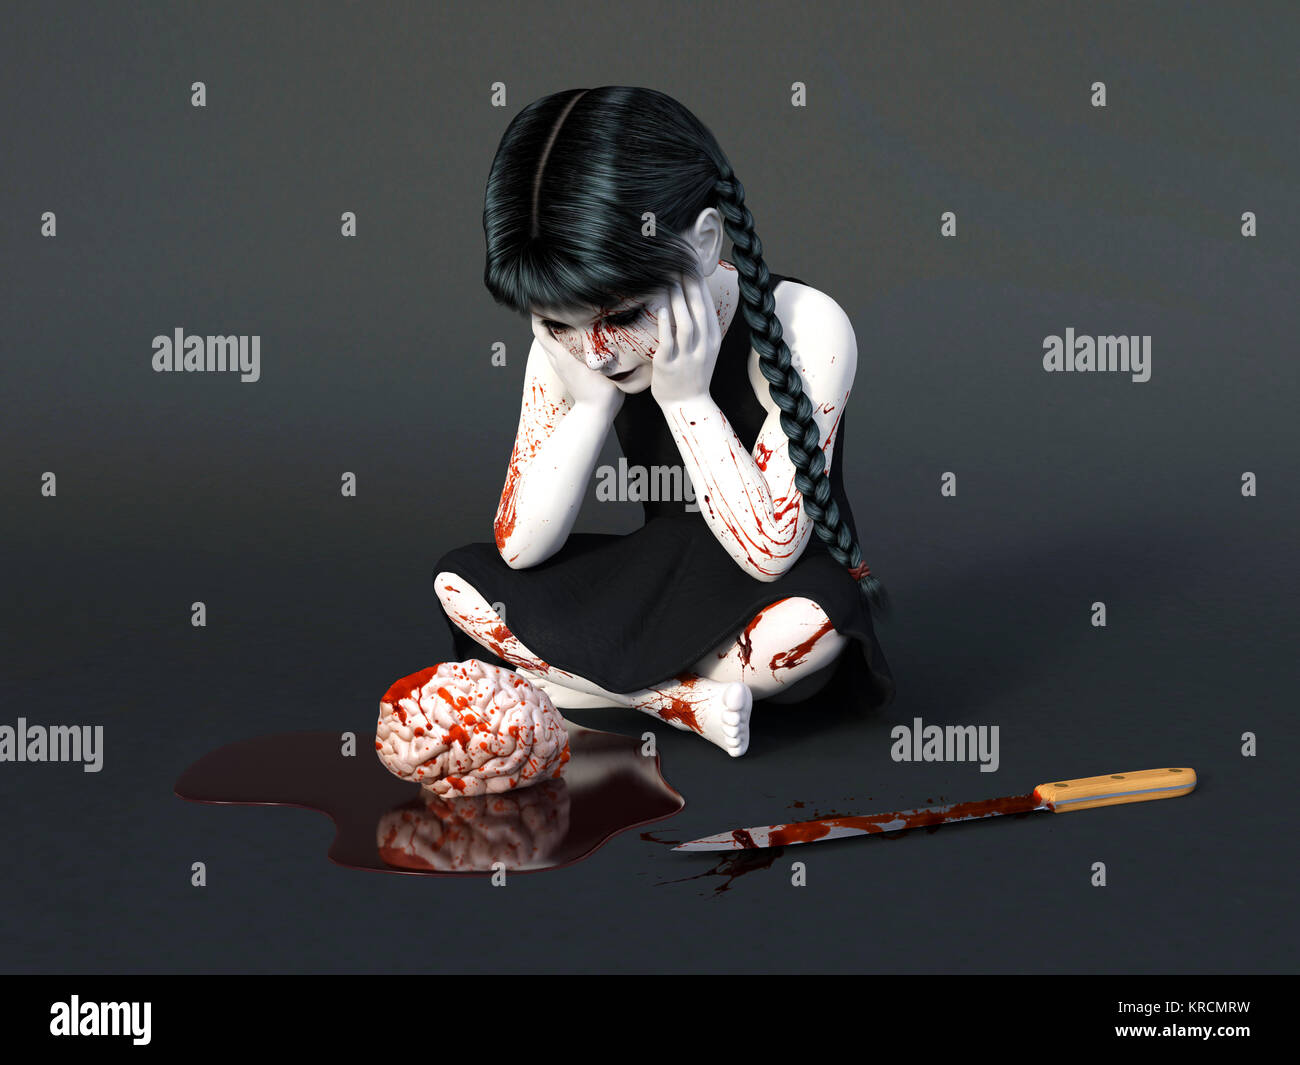 3D rendering of a blood covered small girl sitting on the floor. Stock Photo